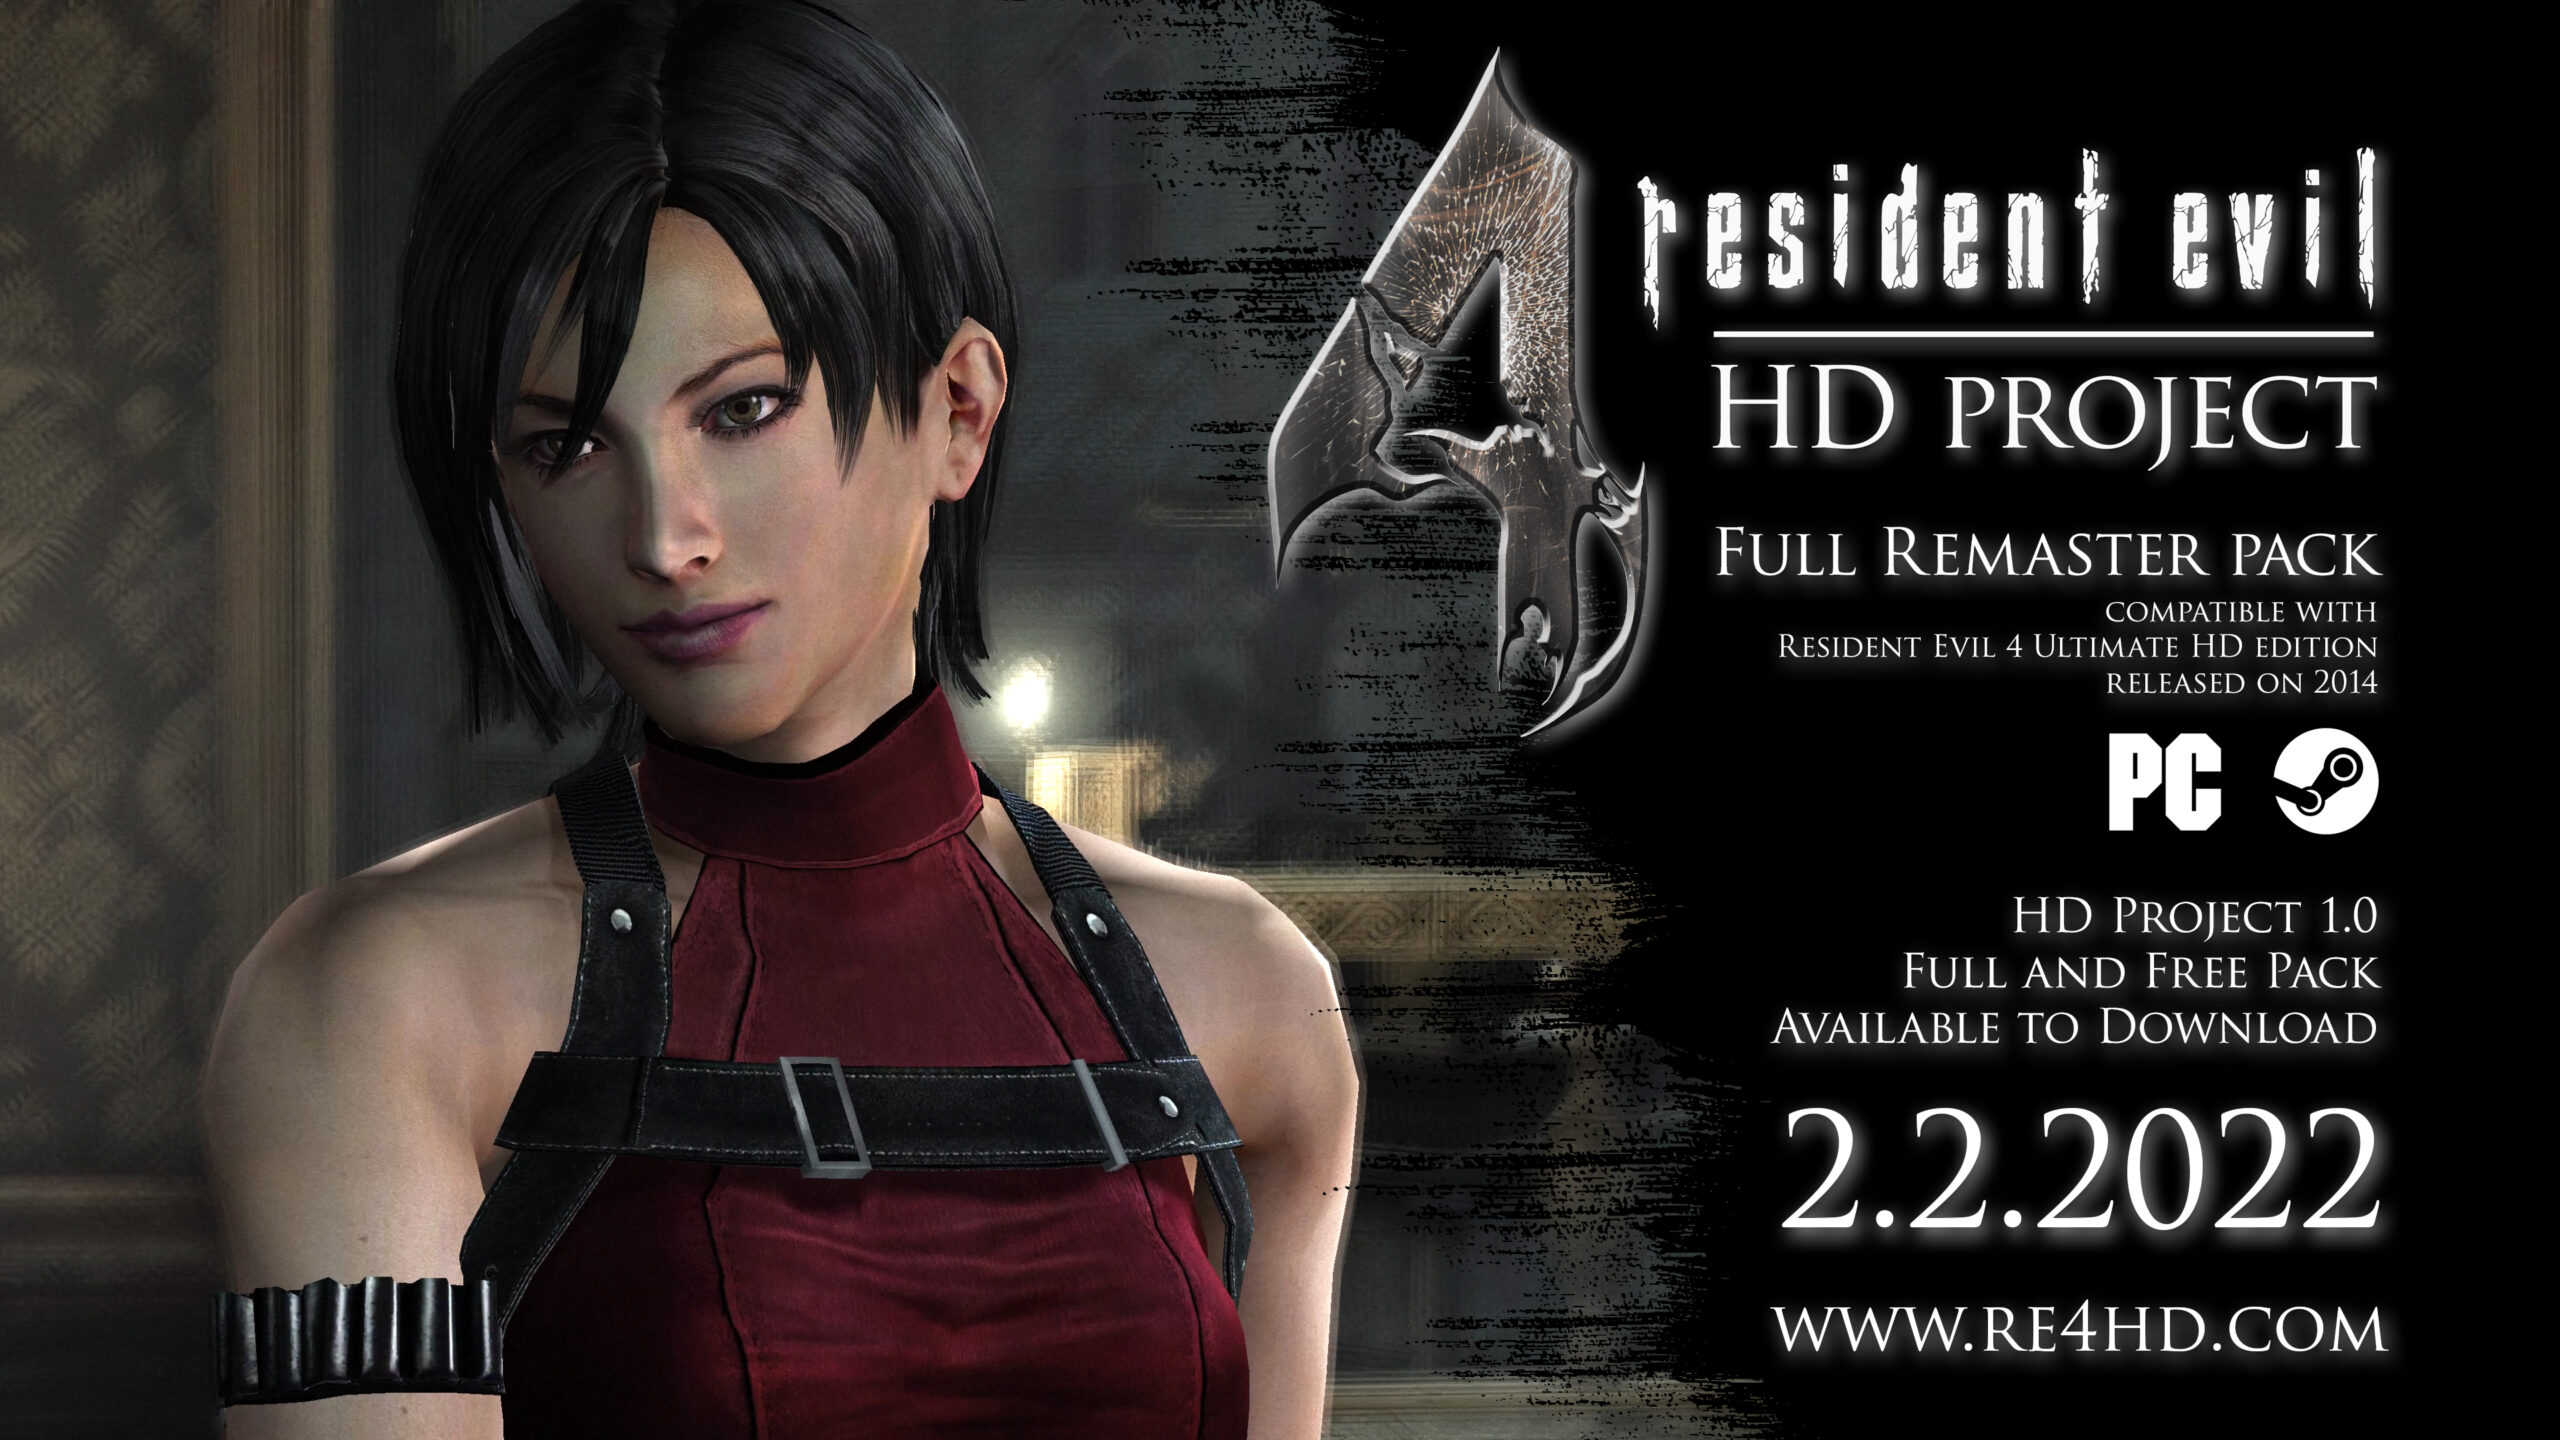 First poster: Resident Evil 4 Remake : r/photoshop